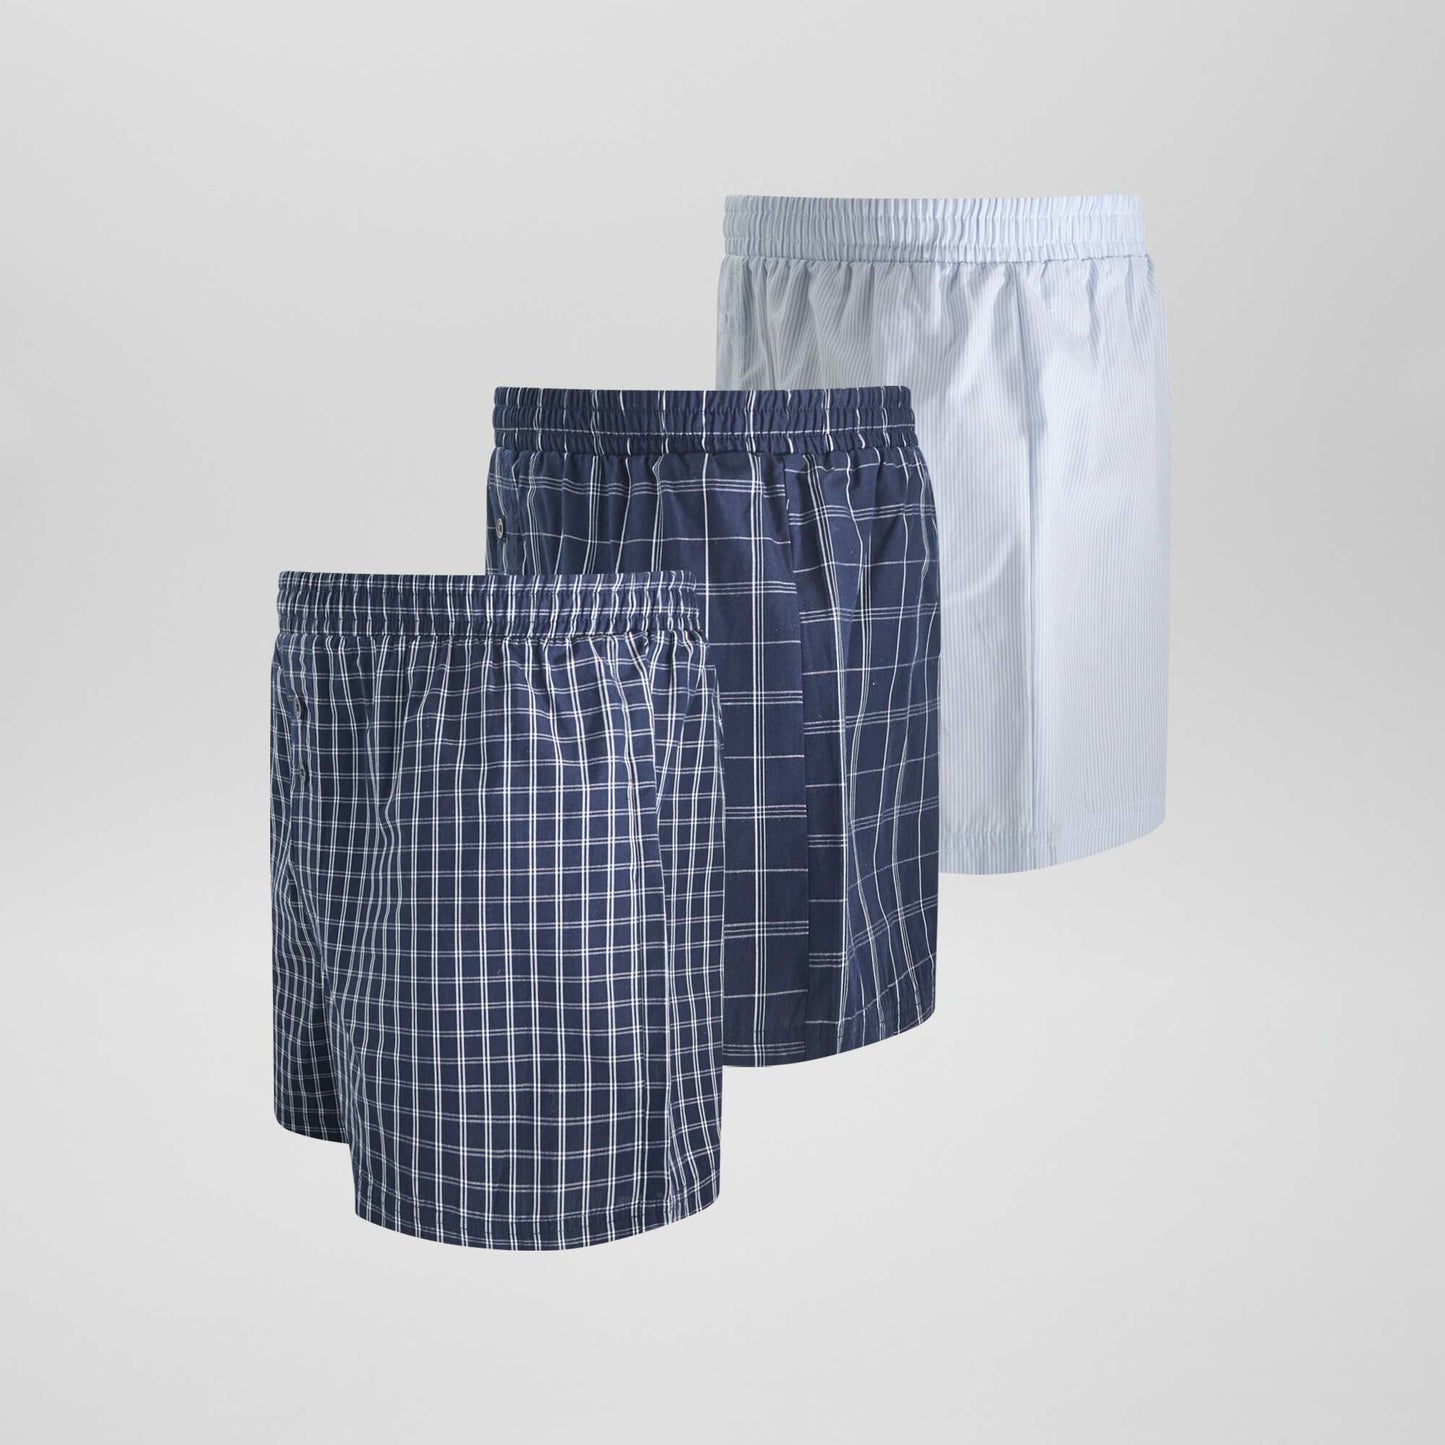 3 pairs of boxer shorts BLUE